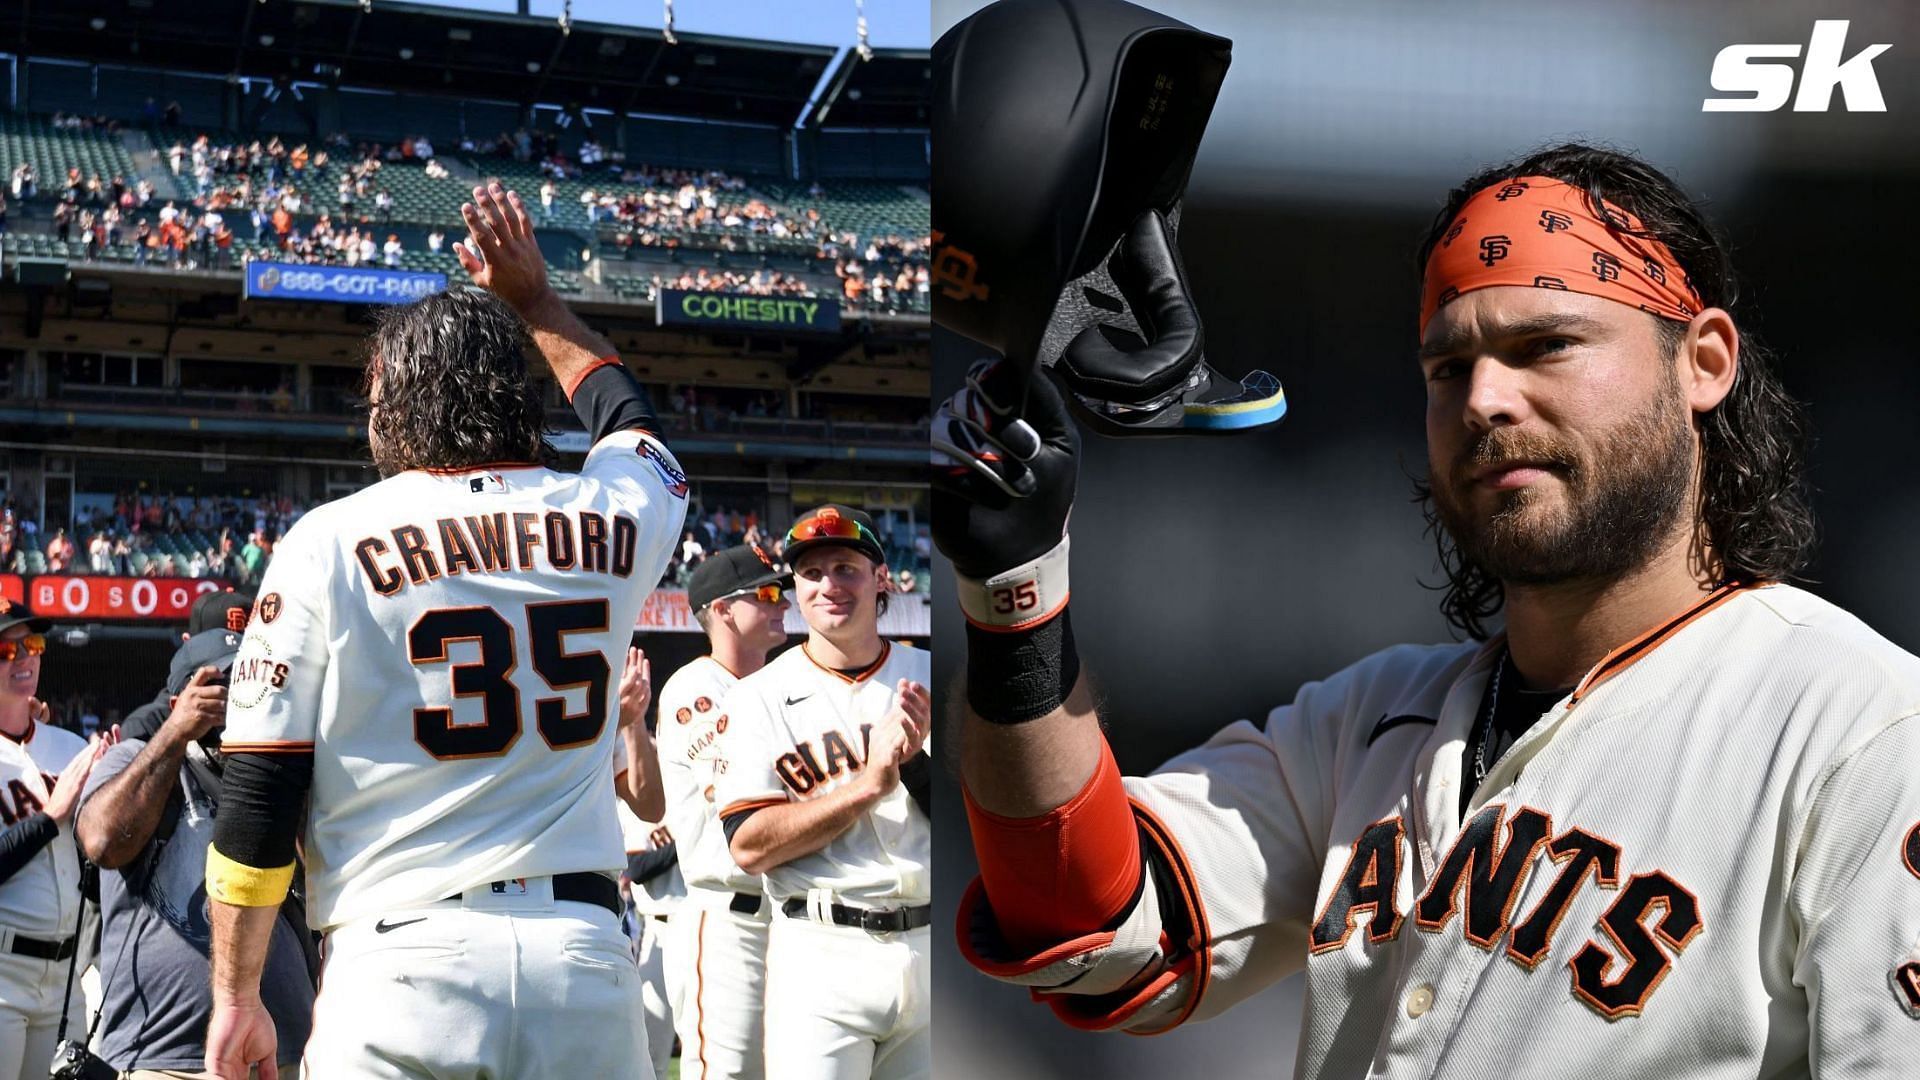 The St. Louis Cardinals have reportedly signed long-time San Francisco Giants shortstop Brandon Crawford